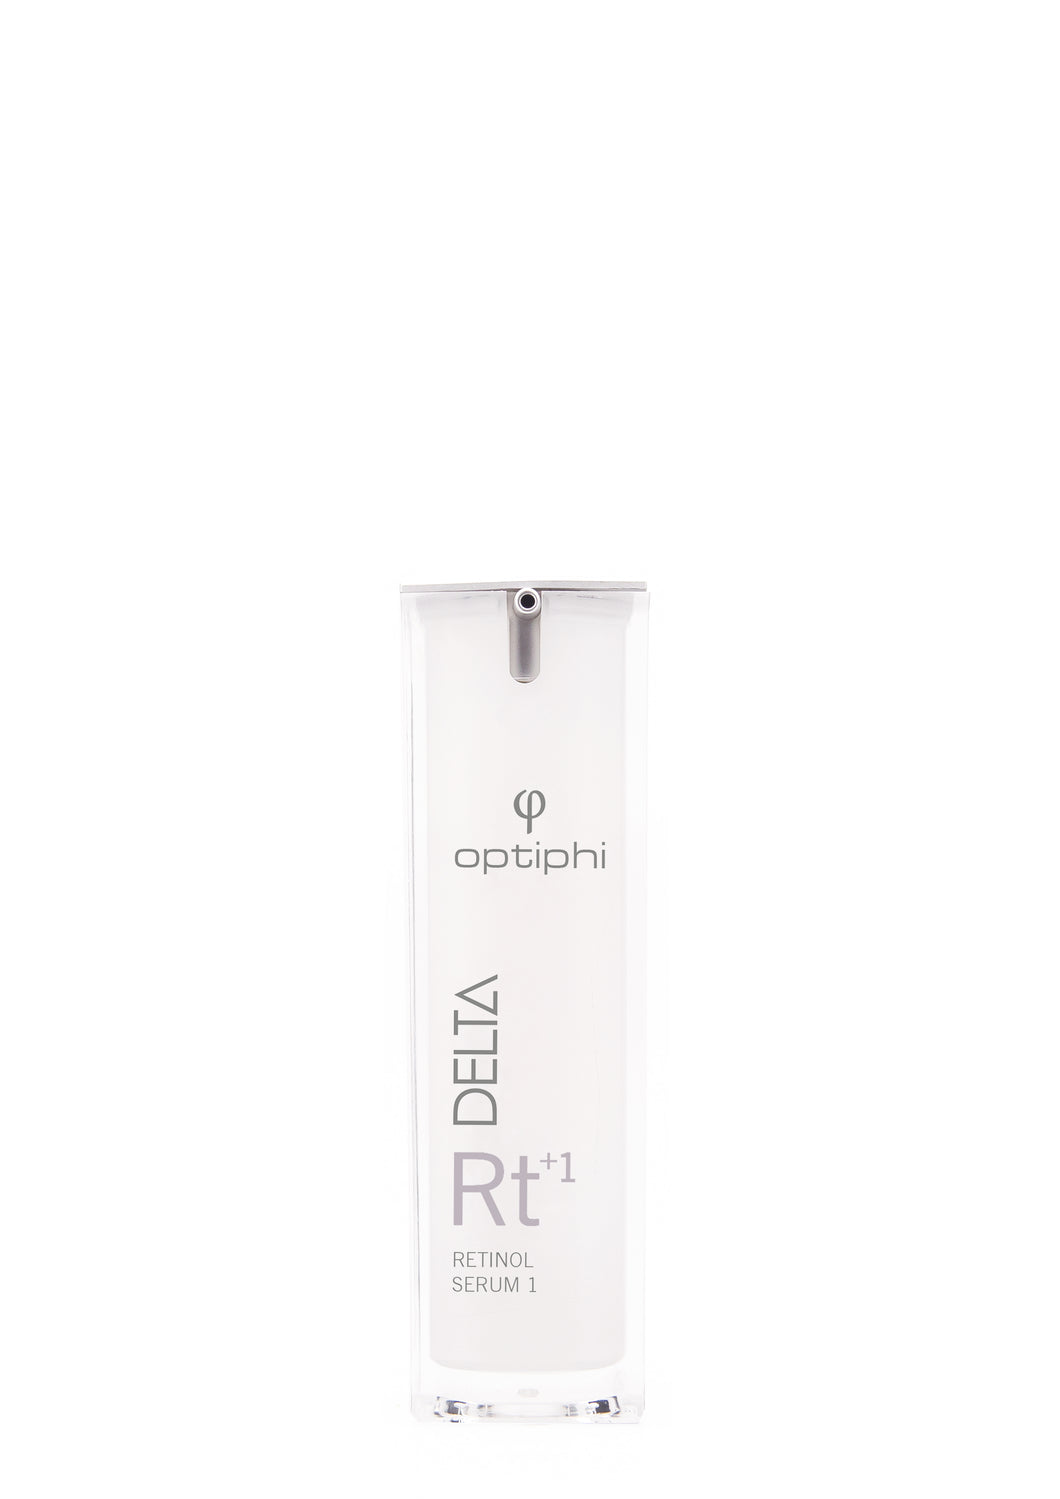 This serum was developed to boost the activity of other DELTA products to reduce the signs of aging, including wrinkling, fine lines, sagging and volume loss, as well as pigmentation concerns